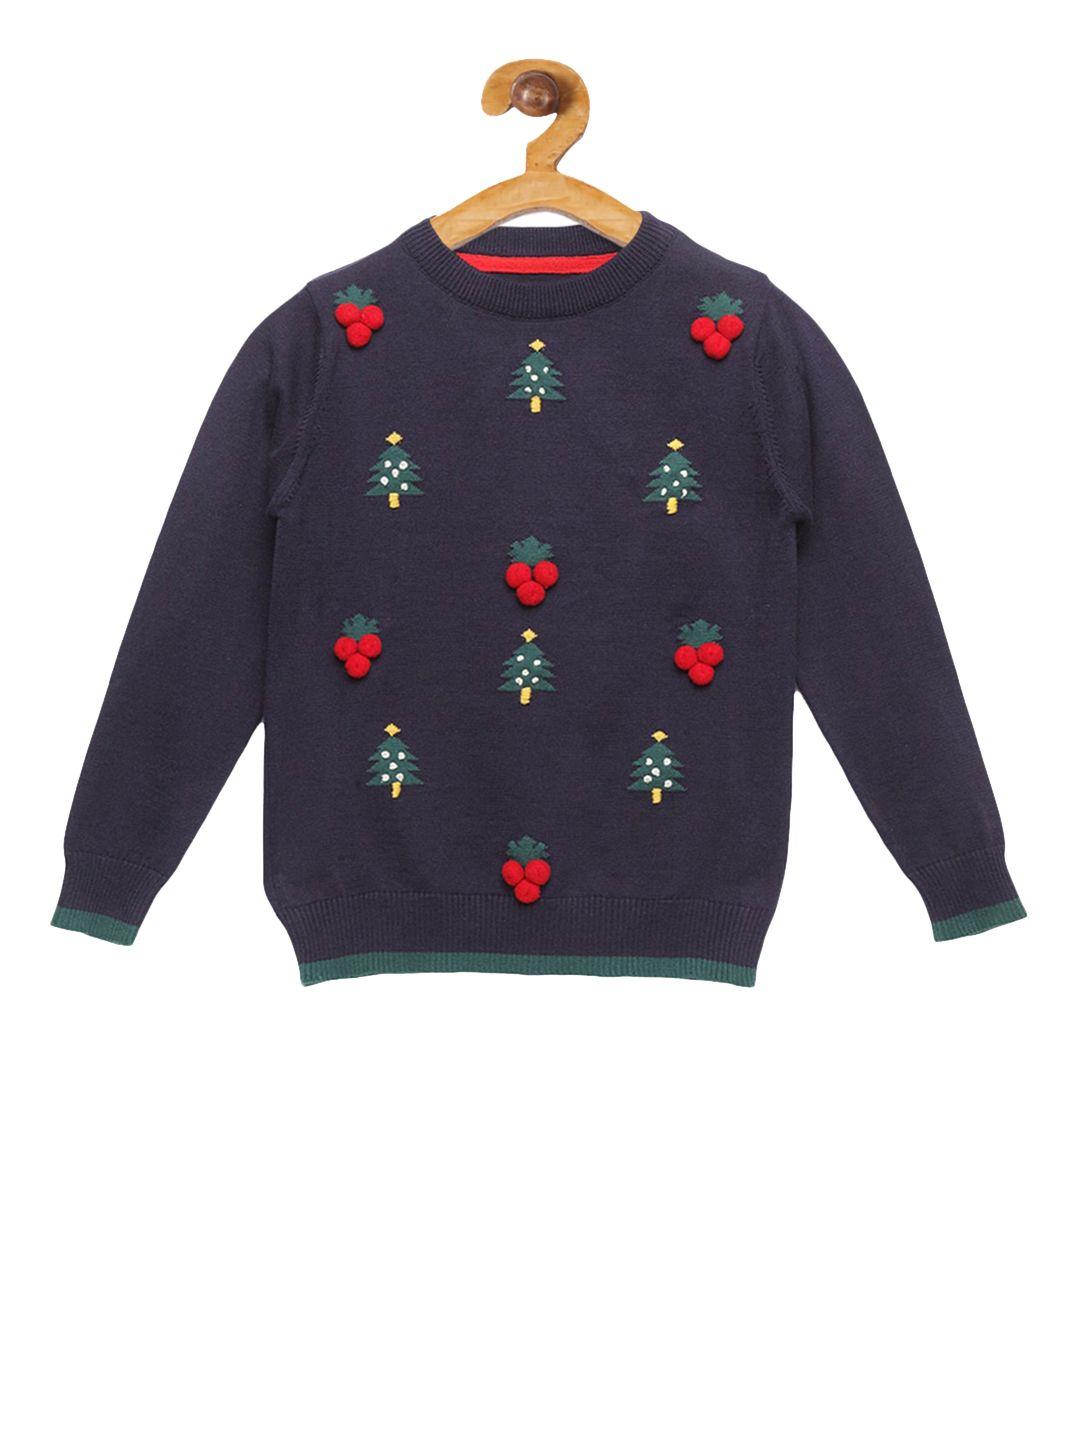 cherry-crumble-infant-boys-navy-blue-&-green-embroidered-pullover-sweater